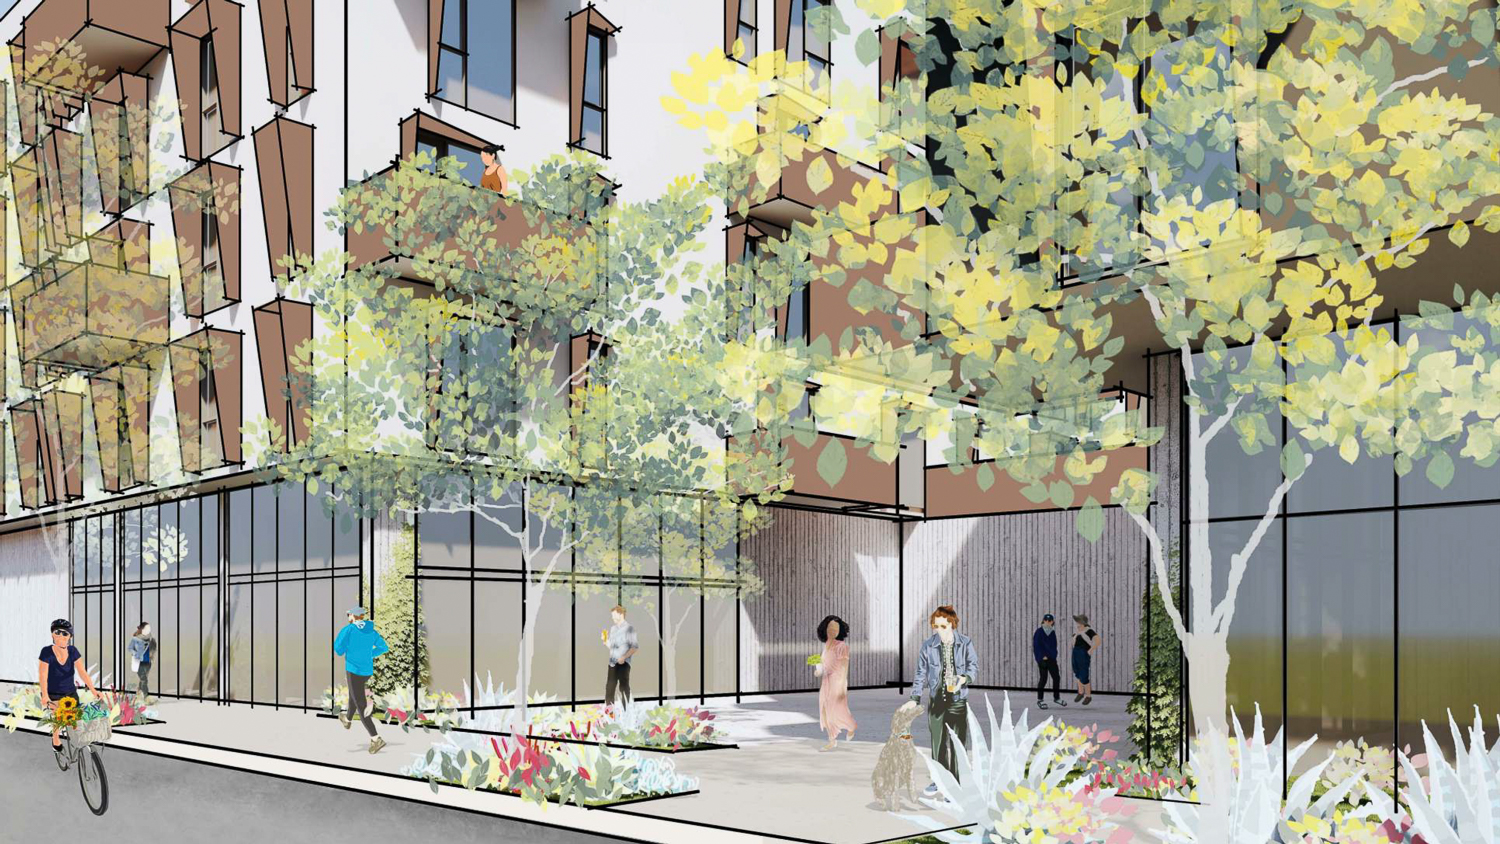 3001 El Camino Real entry courtyard, concept sketch by David Baker Architects